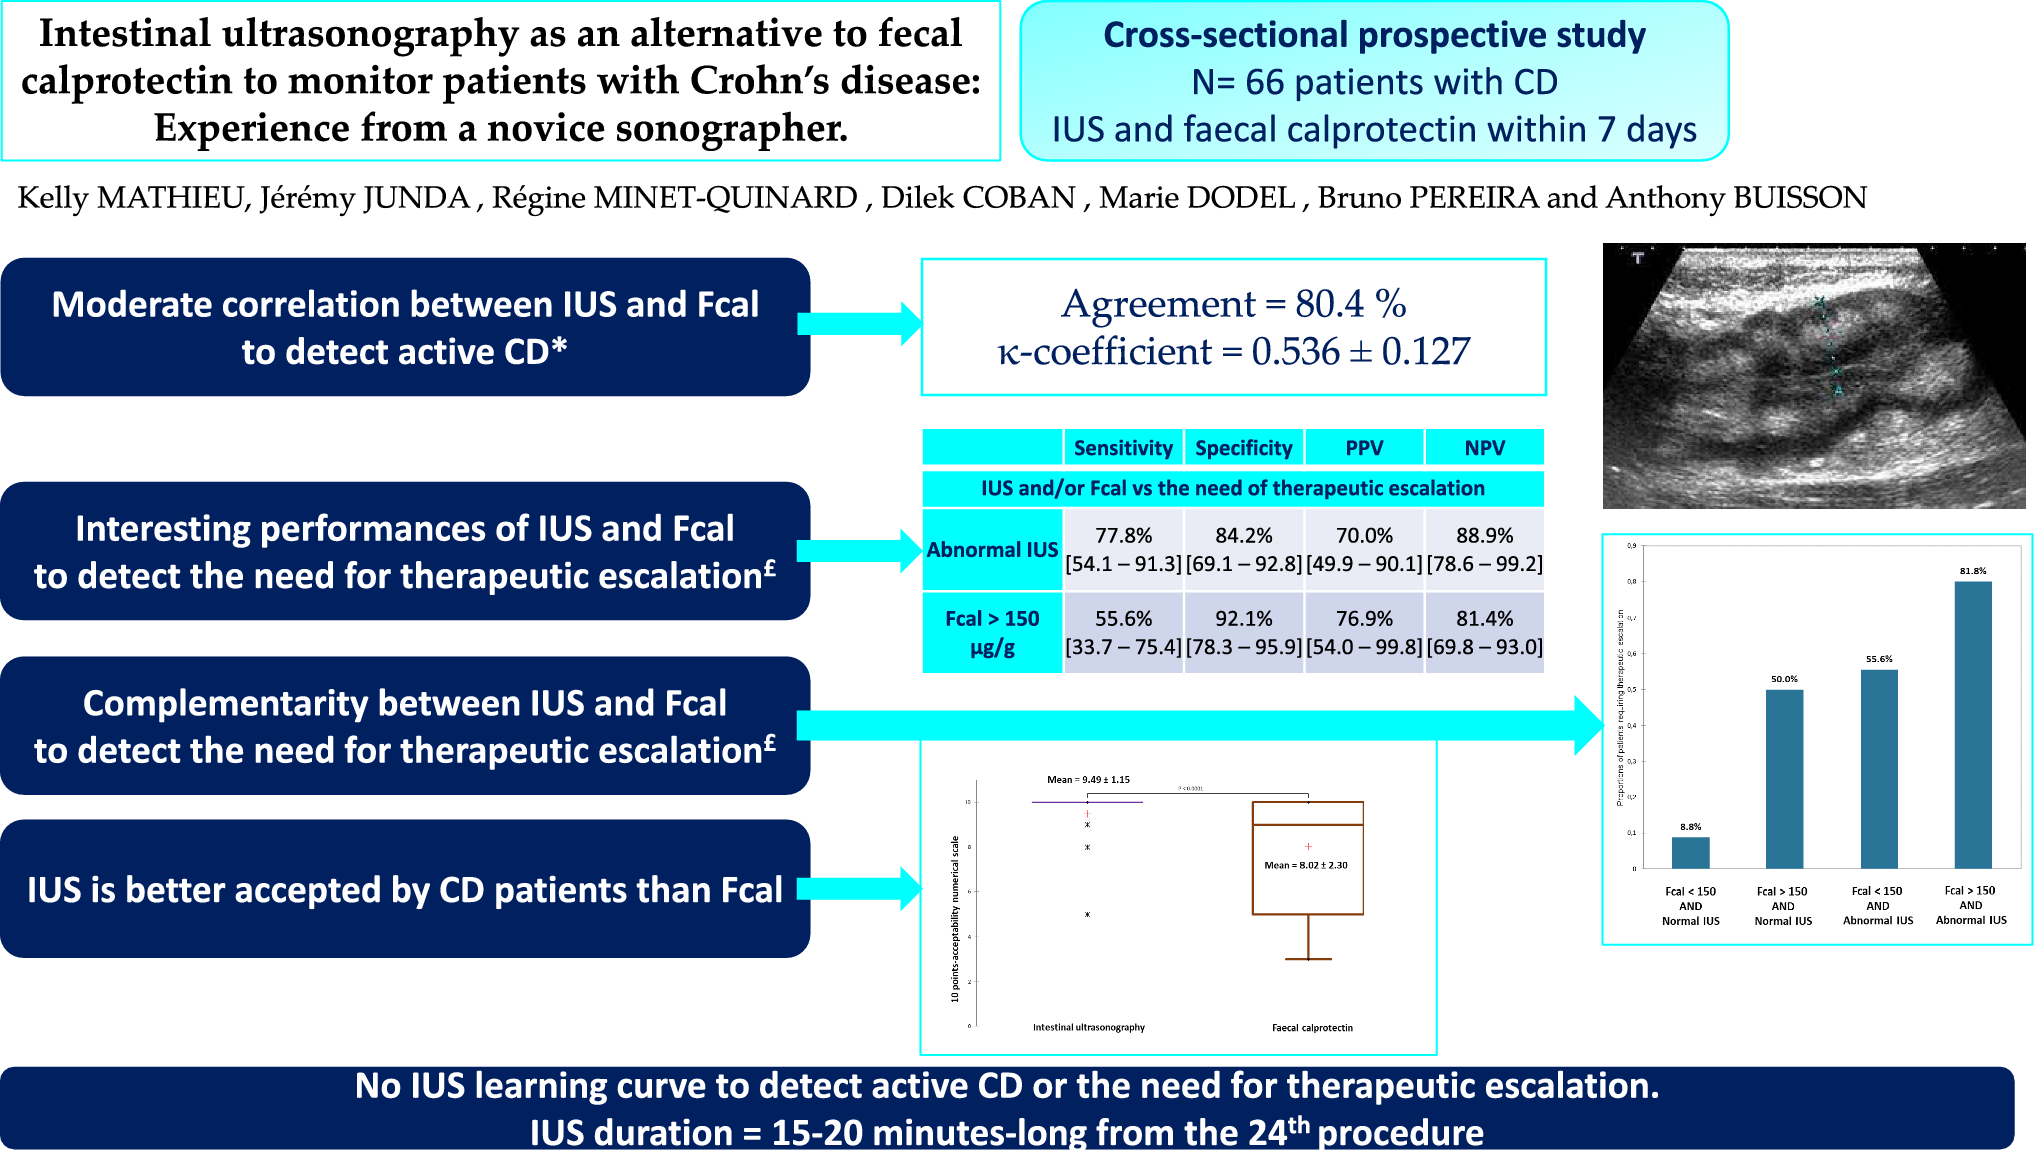 Intestinal Ultrasonography as an Alternative to Fecal Calprotectin to Monitor Patients with Crohn’s Disease: Experience from a Novice Sonographer